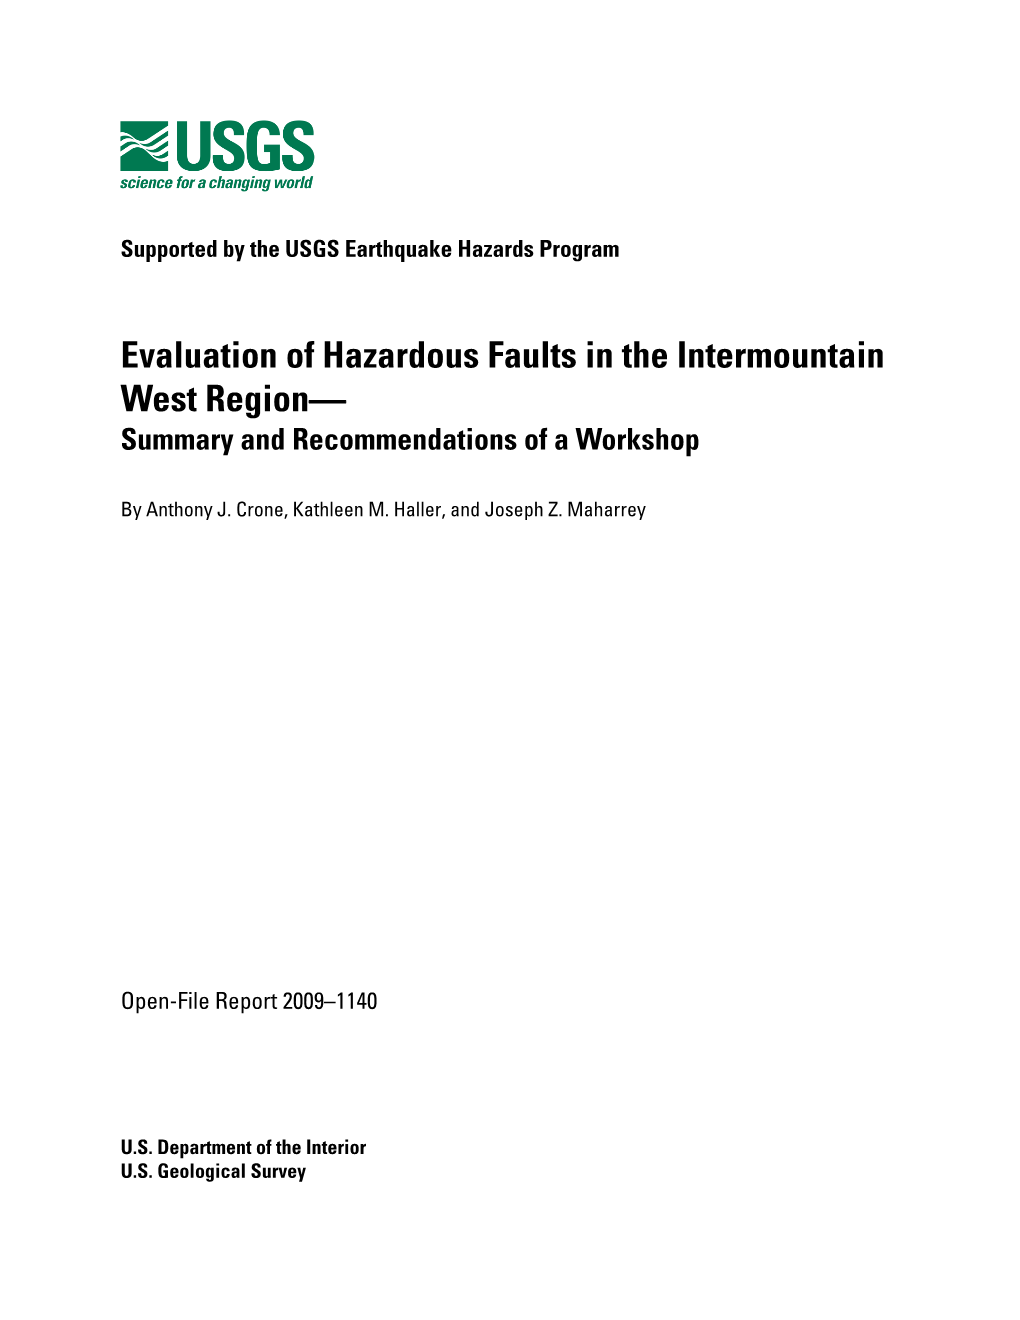 Evaluation of Hazardous Faults in the Intermountain West Region— Summary and Recommendations of a Workshop